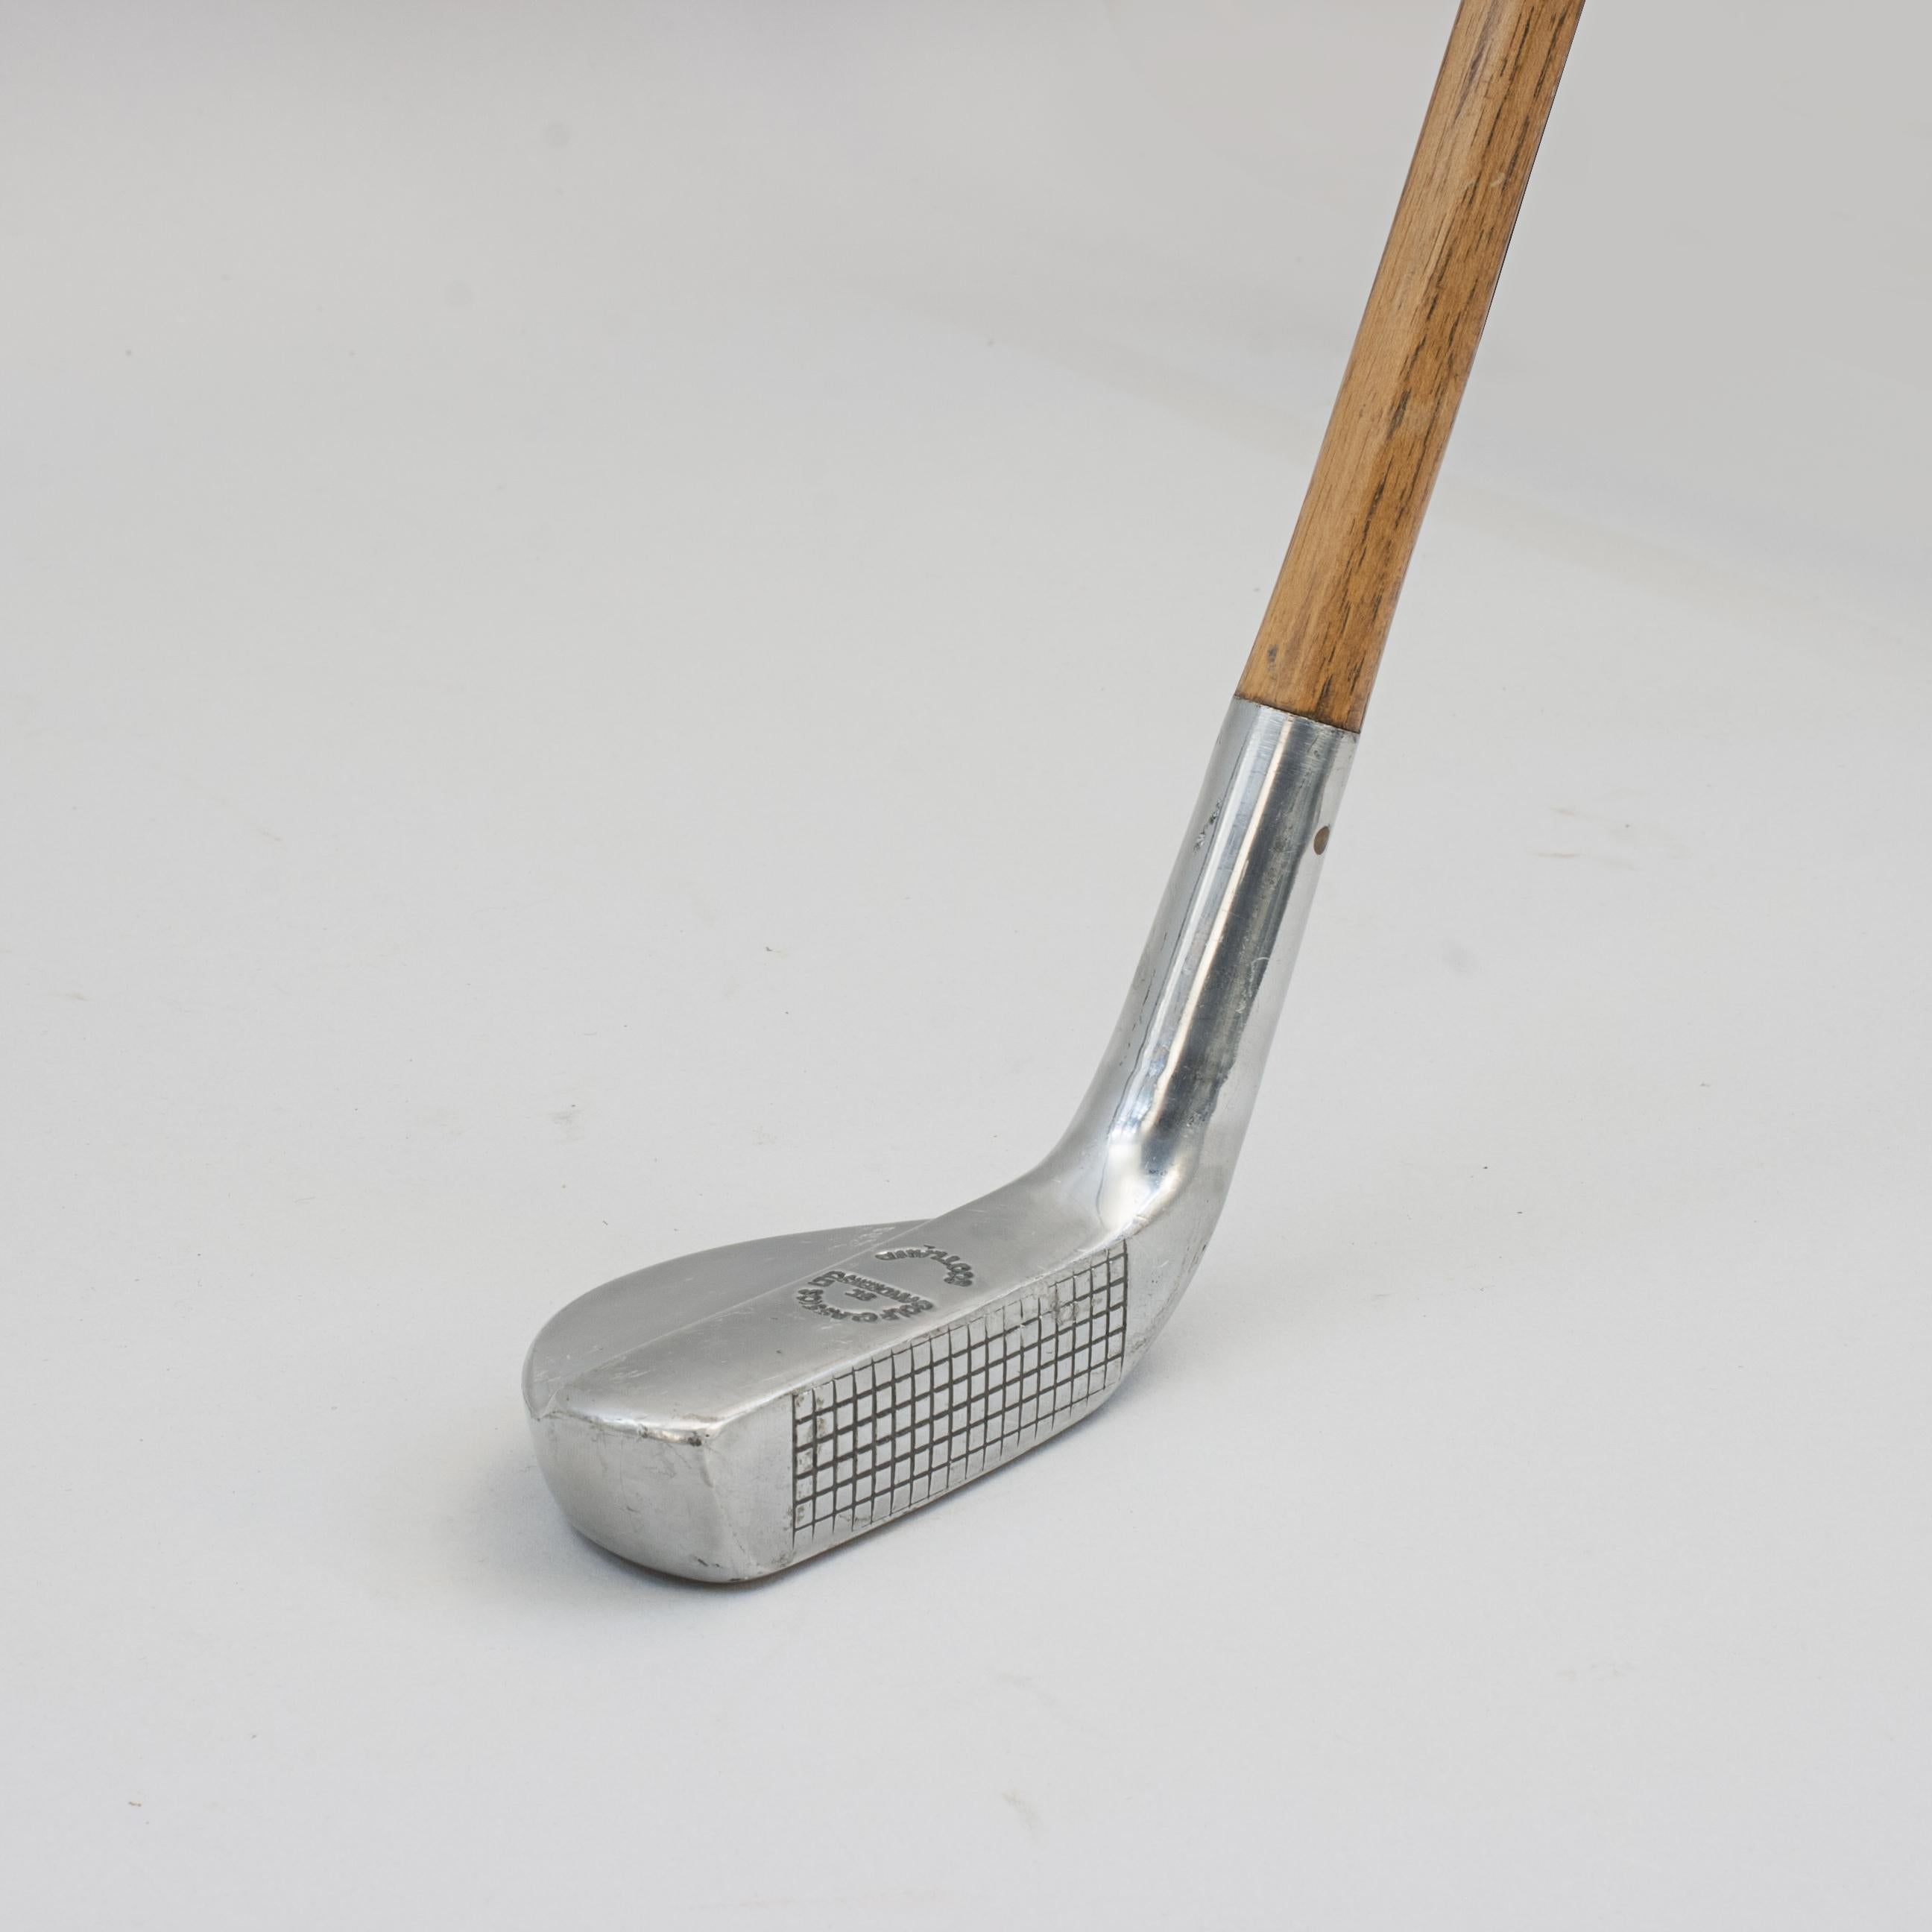 Reproduction Alloy Mills Putter.
A good clean example of an aluminium Mills putter by Golf Classics Ltd., St Andrews, Scotland. The club head with stepped crown and stamped 'Golf Classics Ltd., St Andrews, Scotland', whilst the underside is stamped